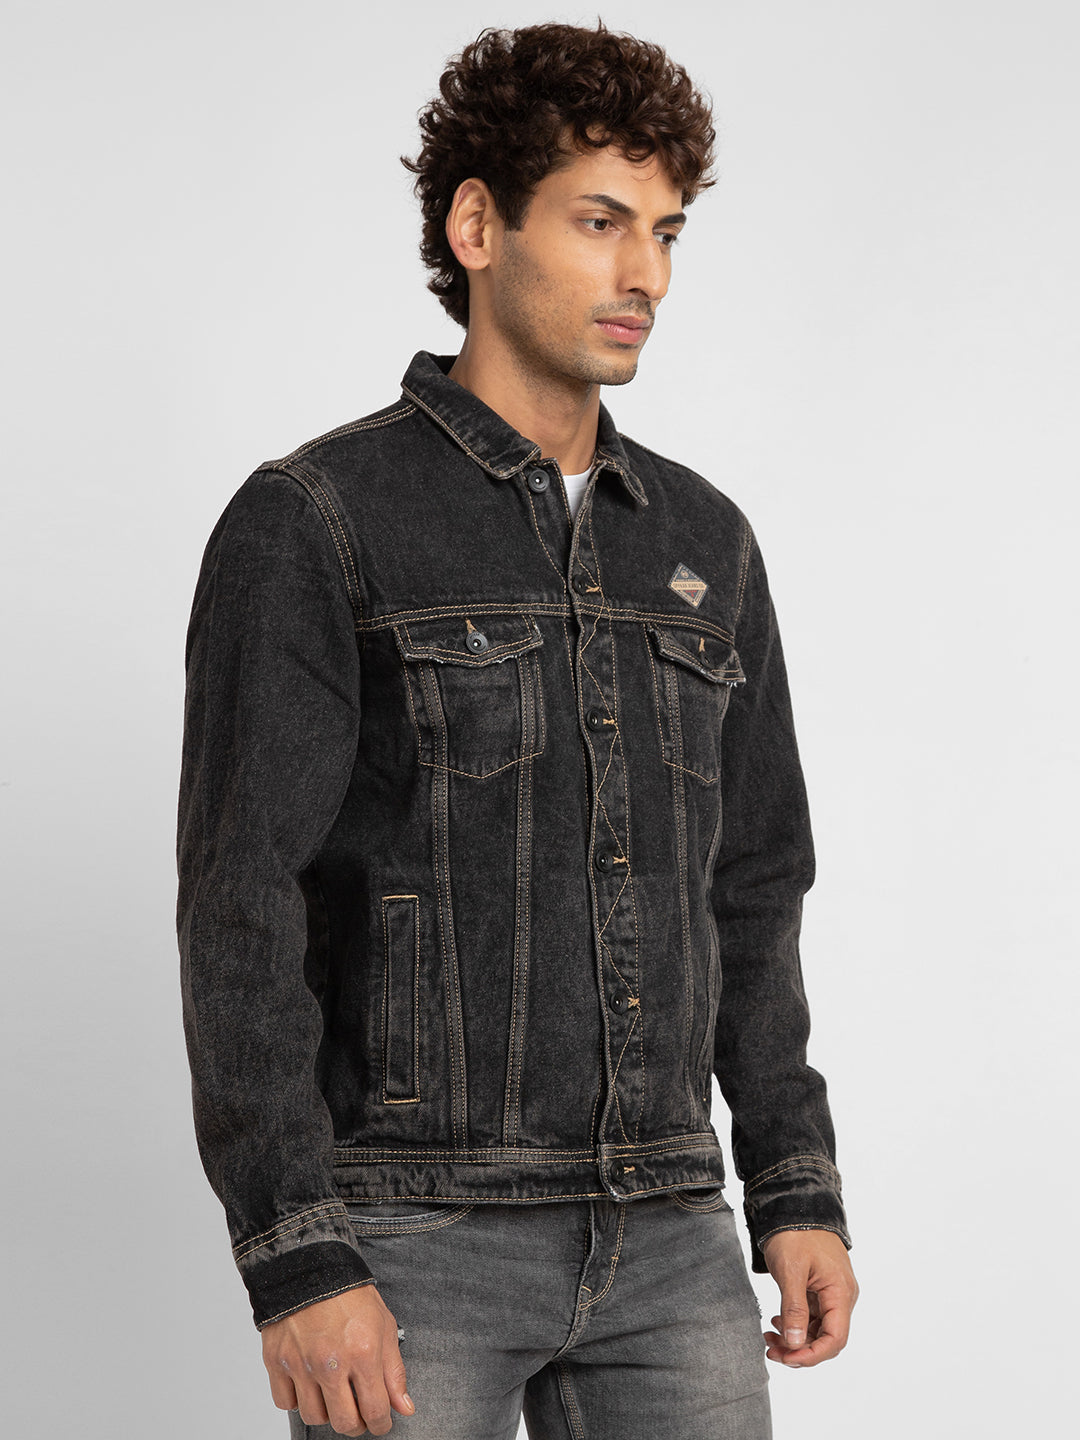 5 Denim Jackets To Enhance Your Personality | Denim jacket men outfit, Fall  outfits men, Mens fashion casual outfits